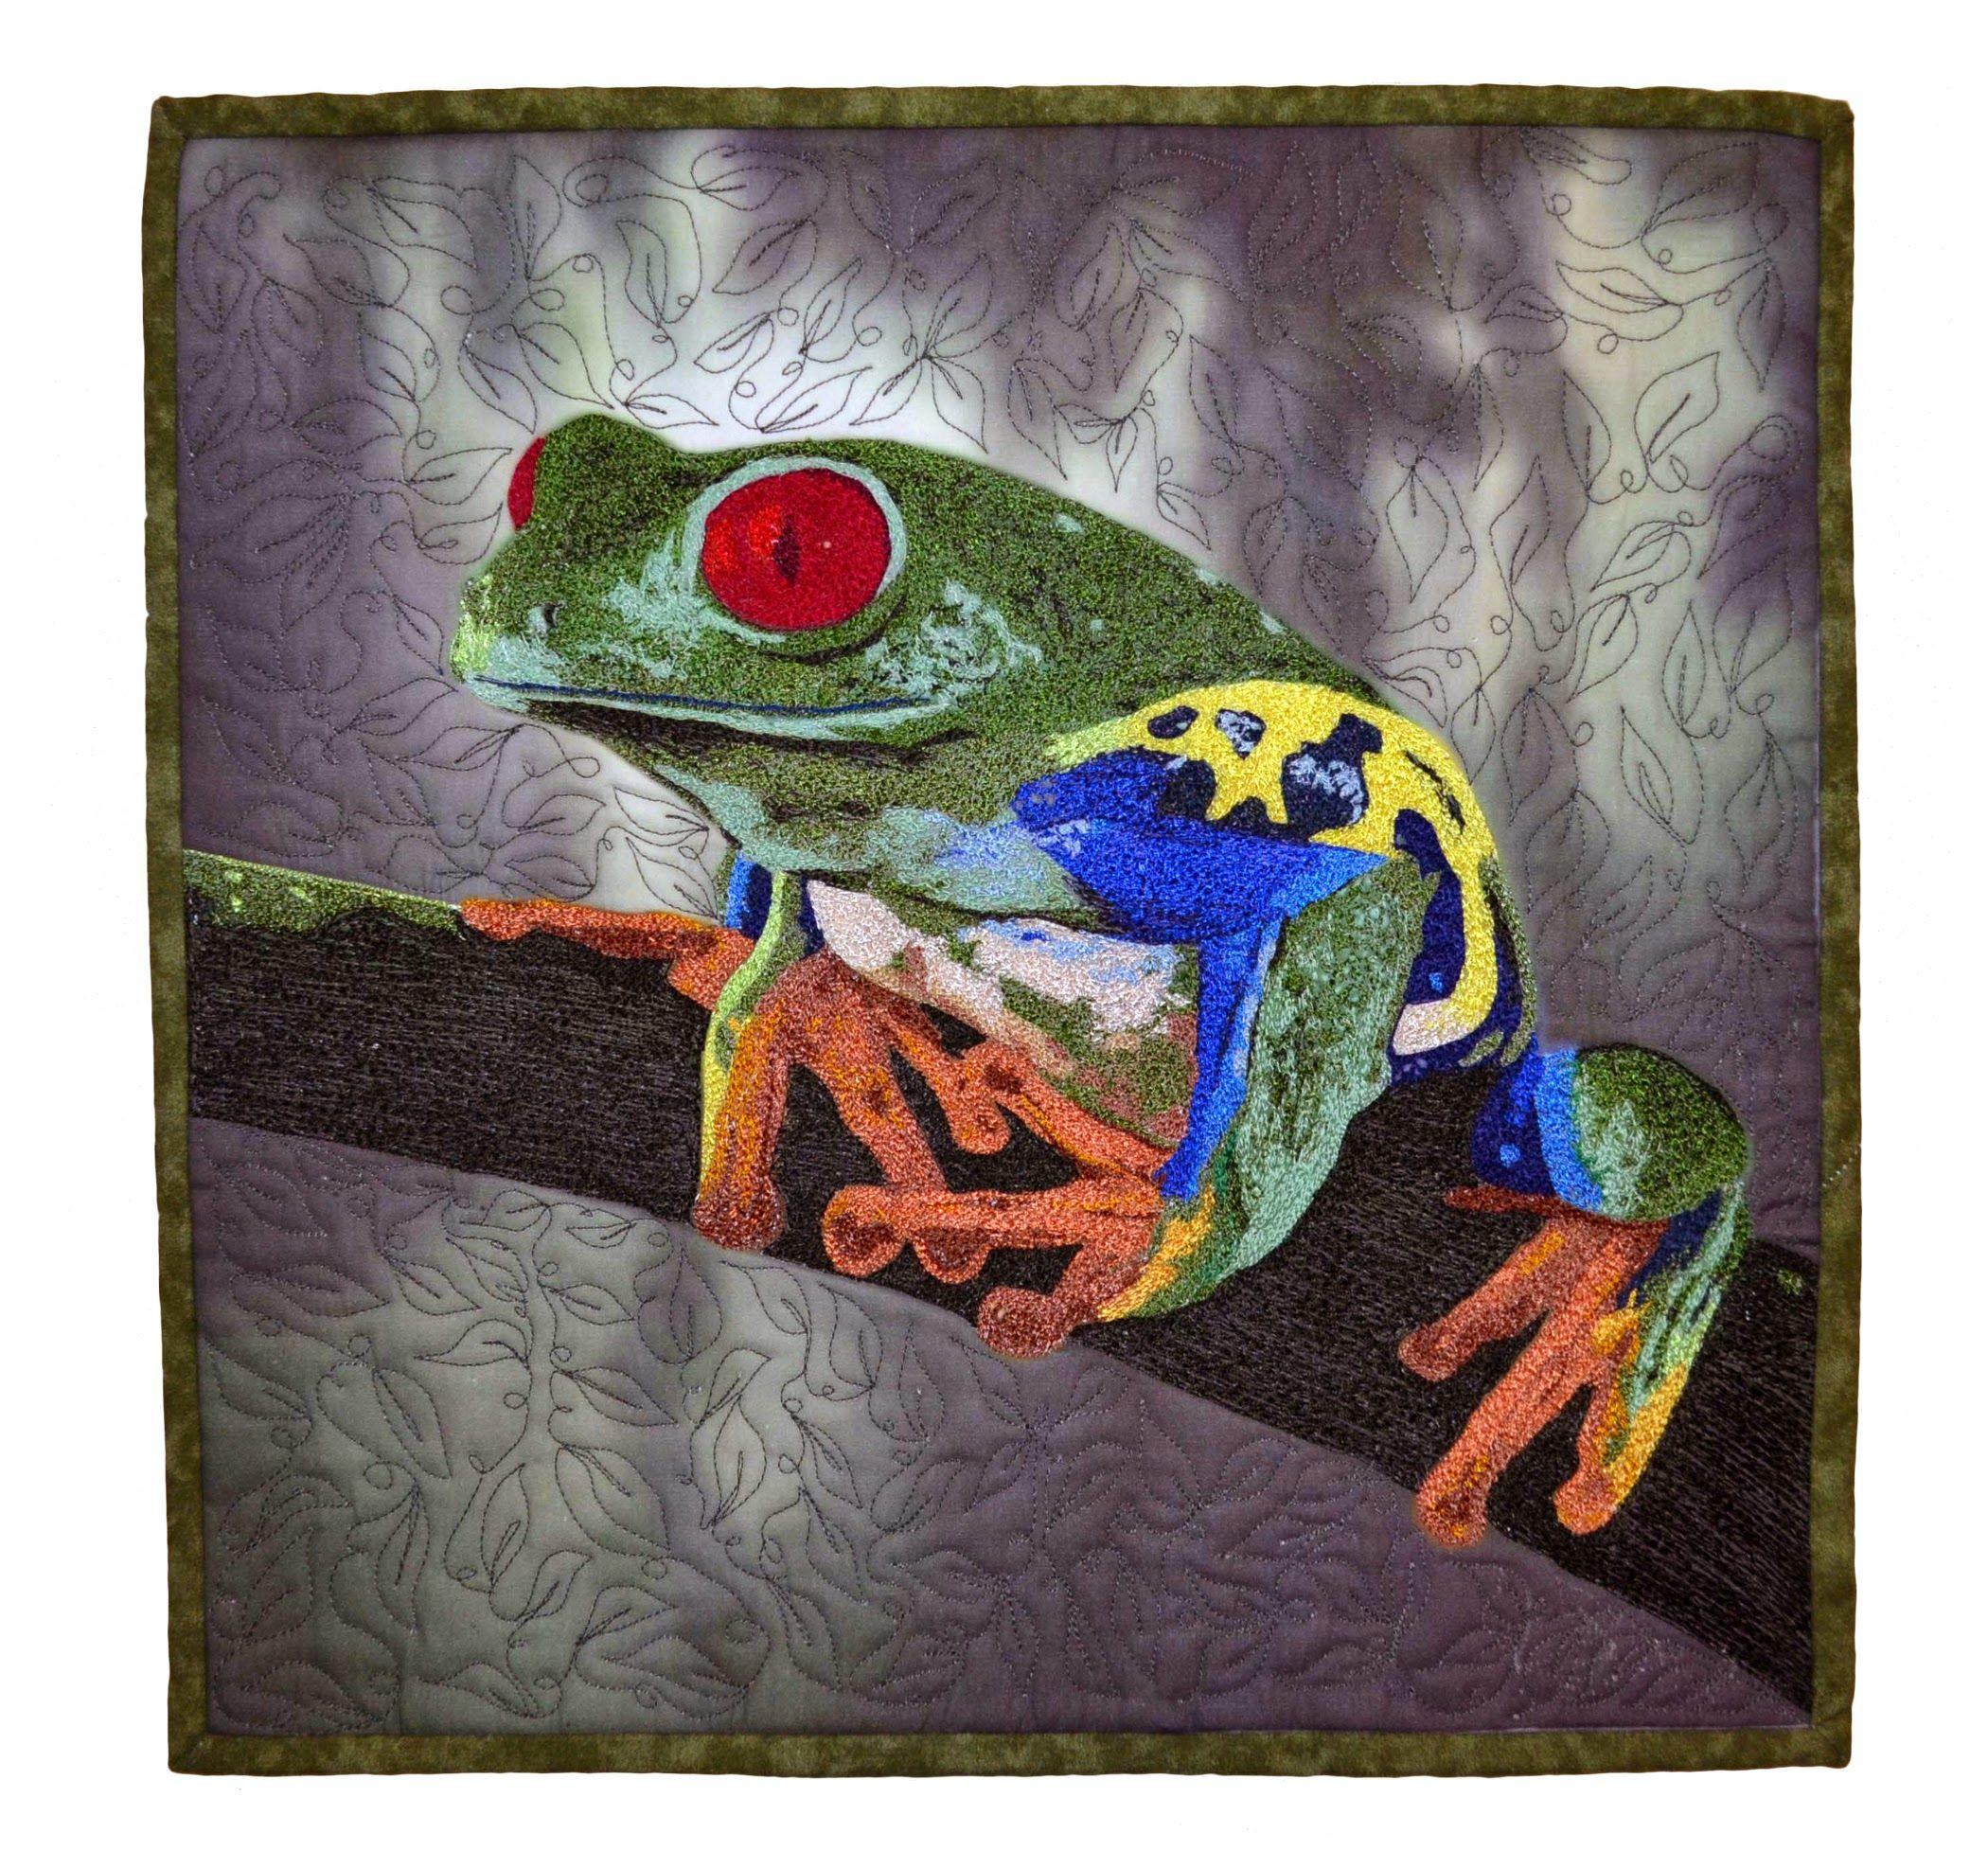 Jan Holzbauer - Red-Eyed Tree Frog